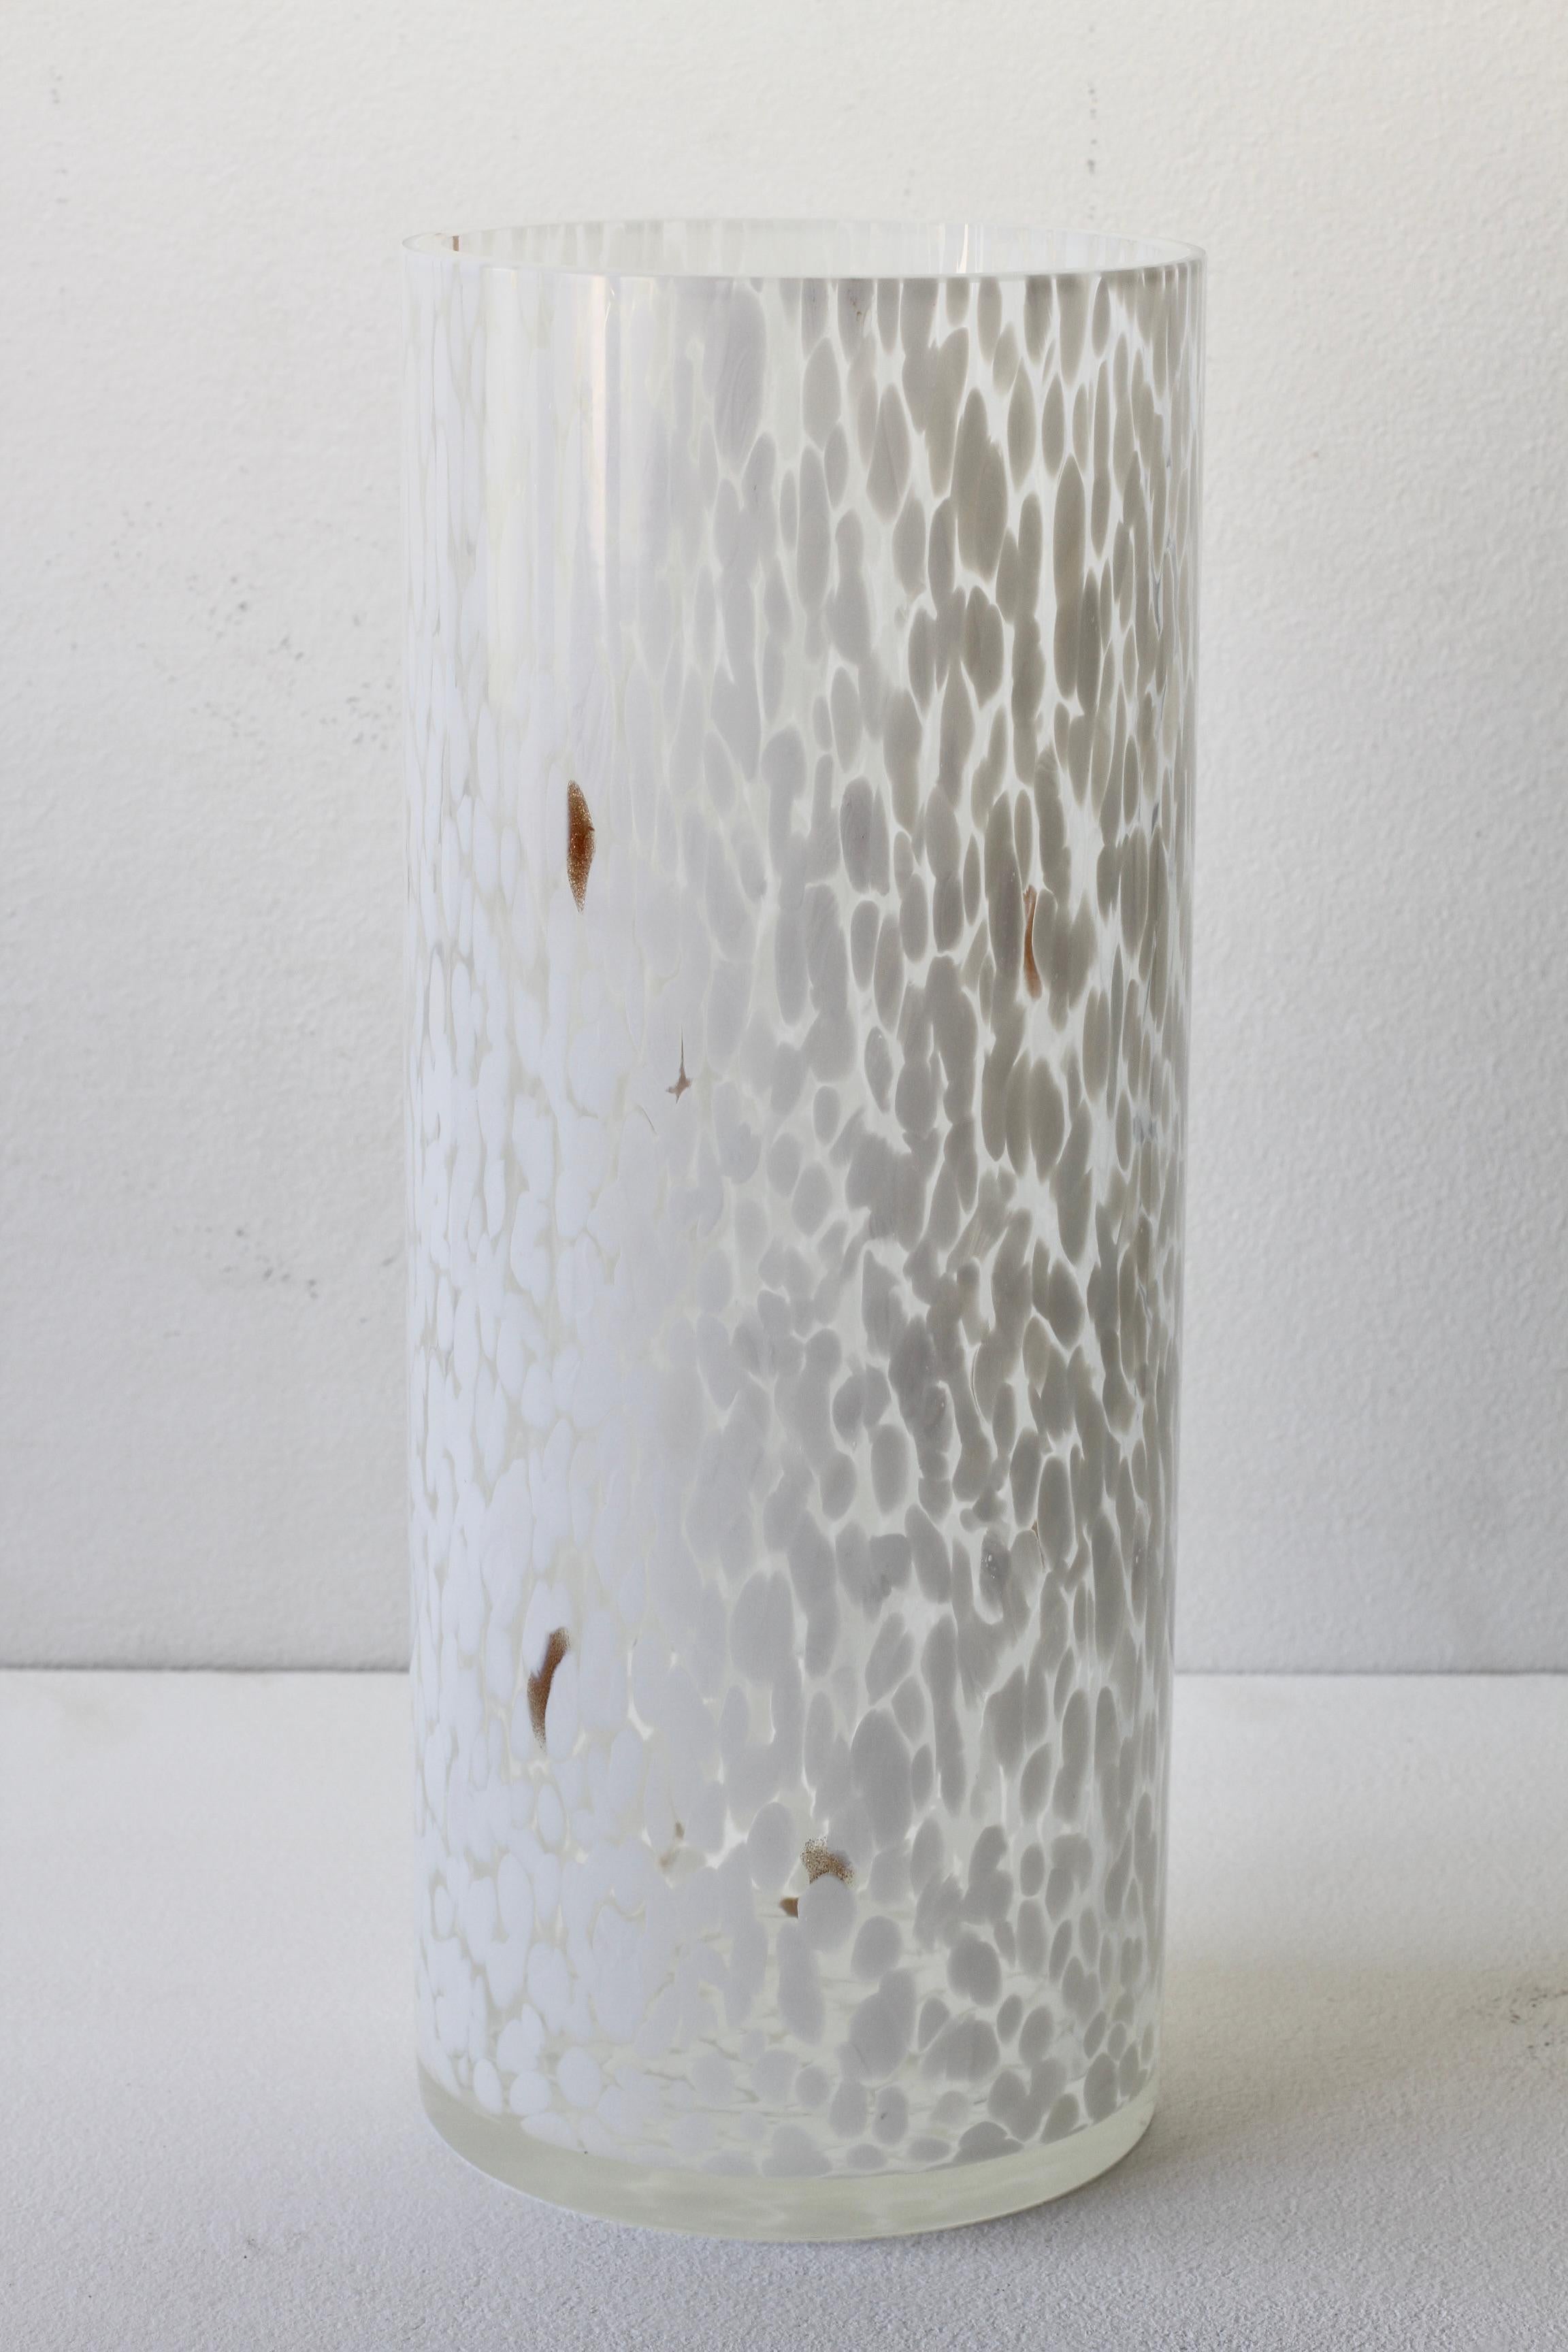 Large, tall and rare 'Lattimo Aventurine' Cenedese vintage Italian midcentury modern Murano glass vase, made on the island of Murano, Italy, circa 1970-1990. Particularly striking is the white speckled, dotted patches encased in clear glass with